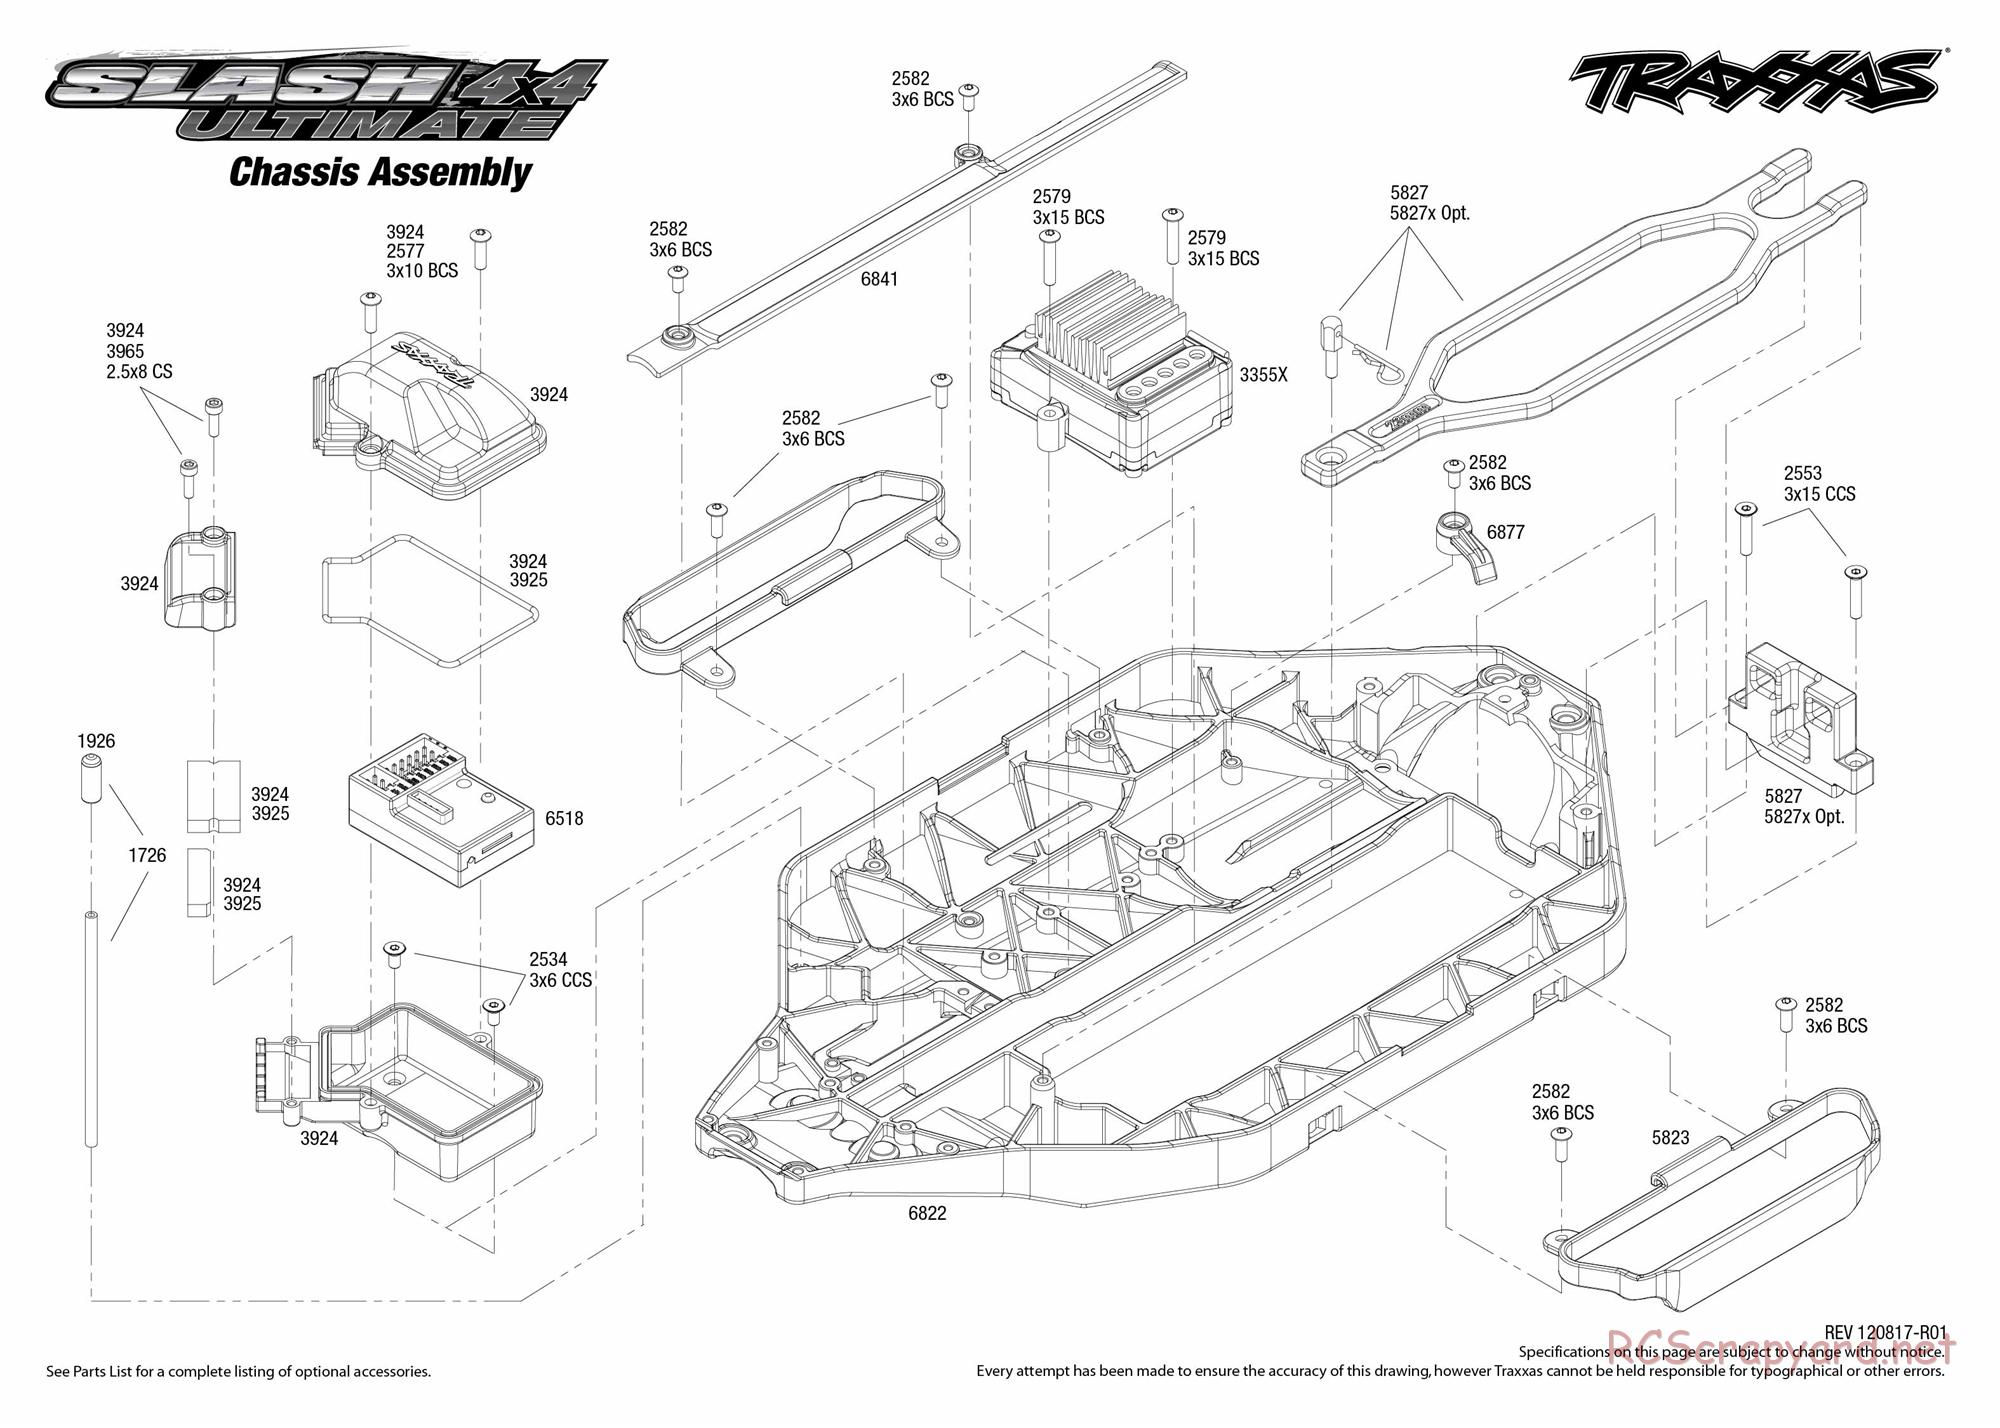 Traxxas - Slash 4x4 Ultimate - Exploded Views - Page 1